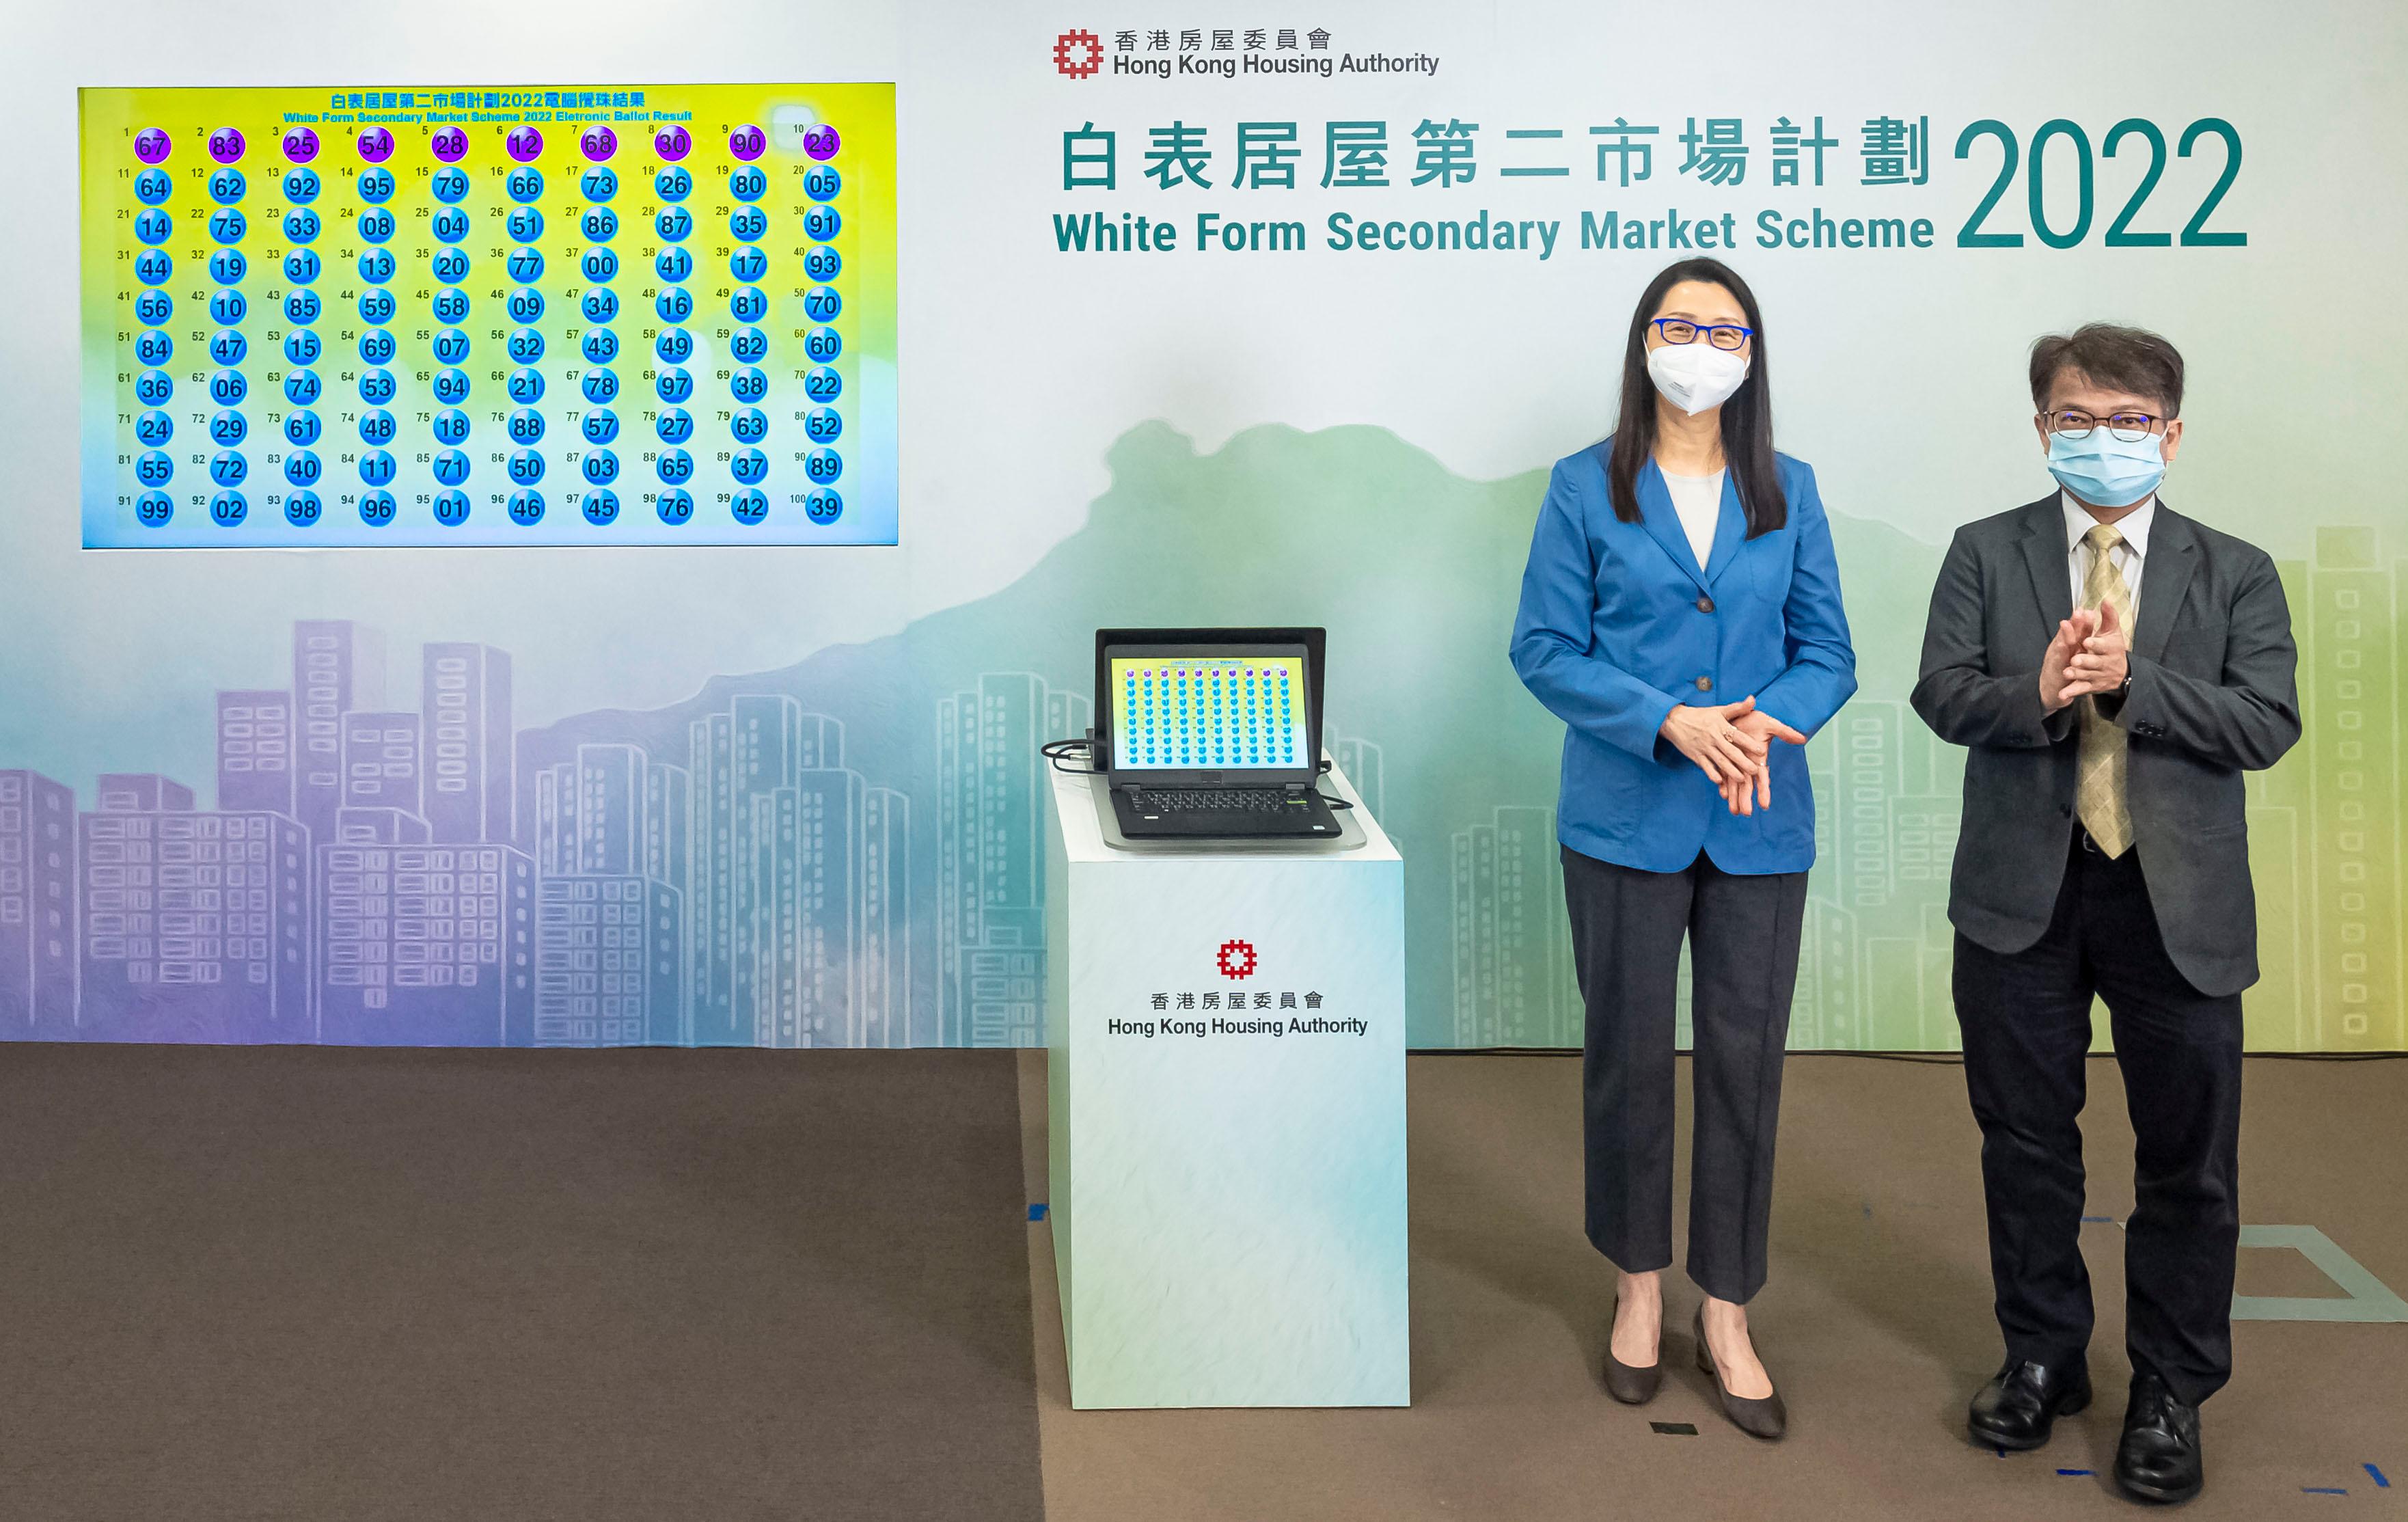 The Chairman of the Subsidised Housing Committee of the Hong Kong Housing Authority, Ms Cleresa Wong (left), accompanied by the Assistant Director of Housing (Housing Subsidies), Mr Kenneth Leung, officiates at the electronic ballot drawing ceremony today (June 13) for the White Form Secondary Market Scheme 2022. The ballot results will determine the applicants' priority sequence based on the last two digits of their application numbers.